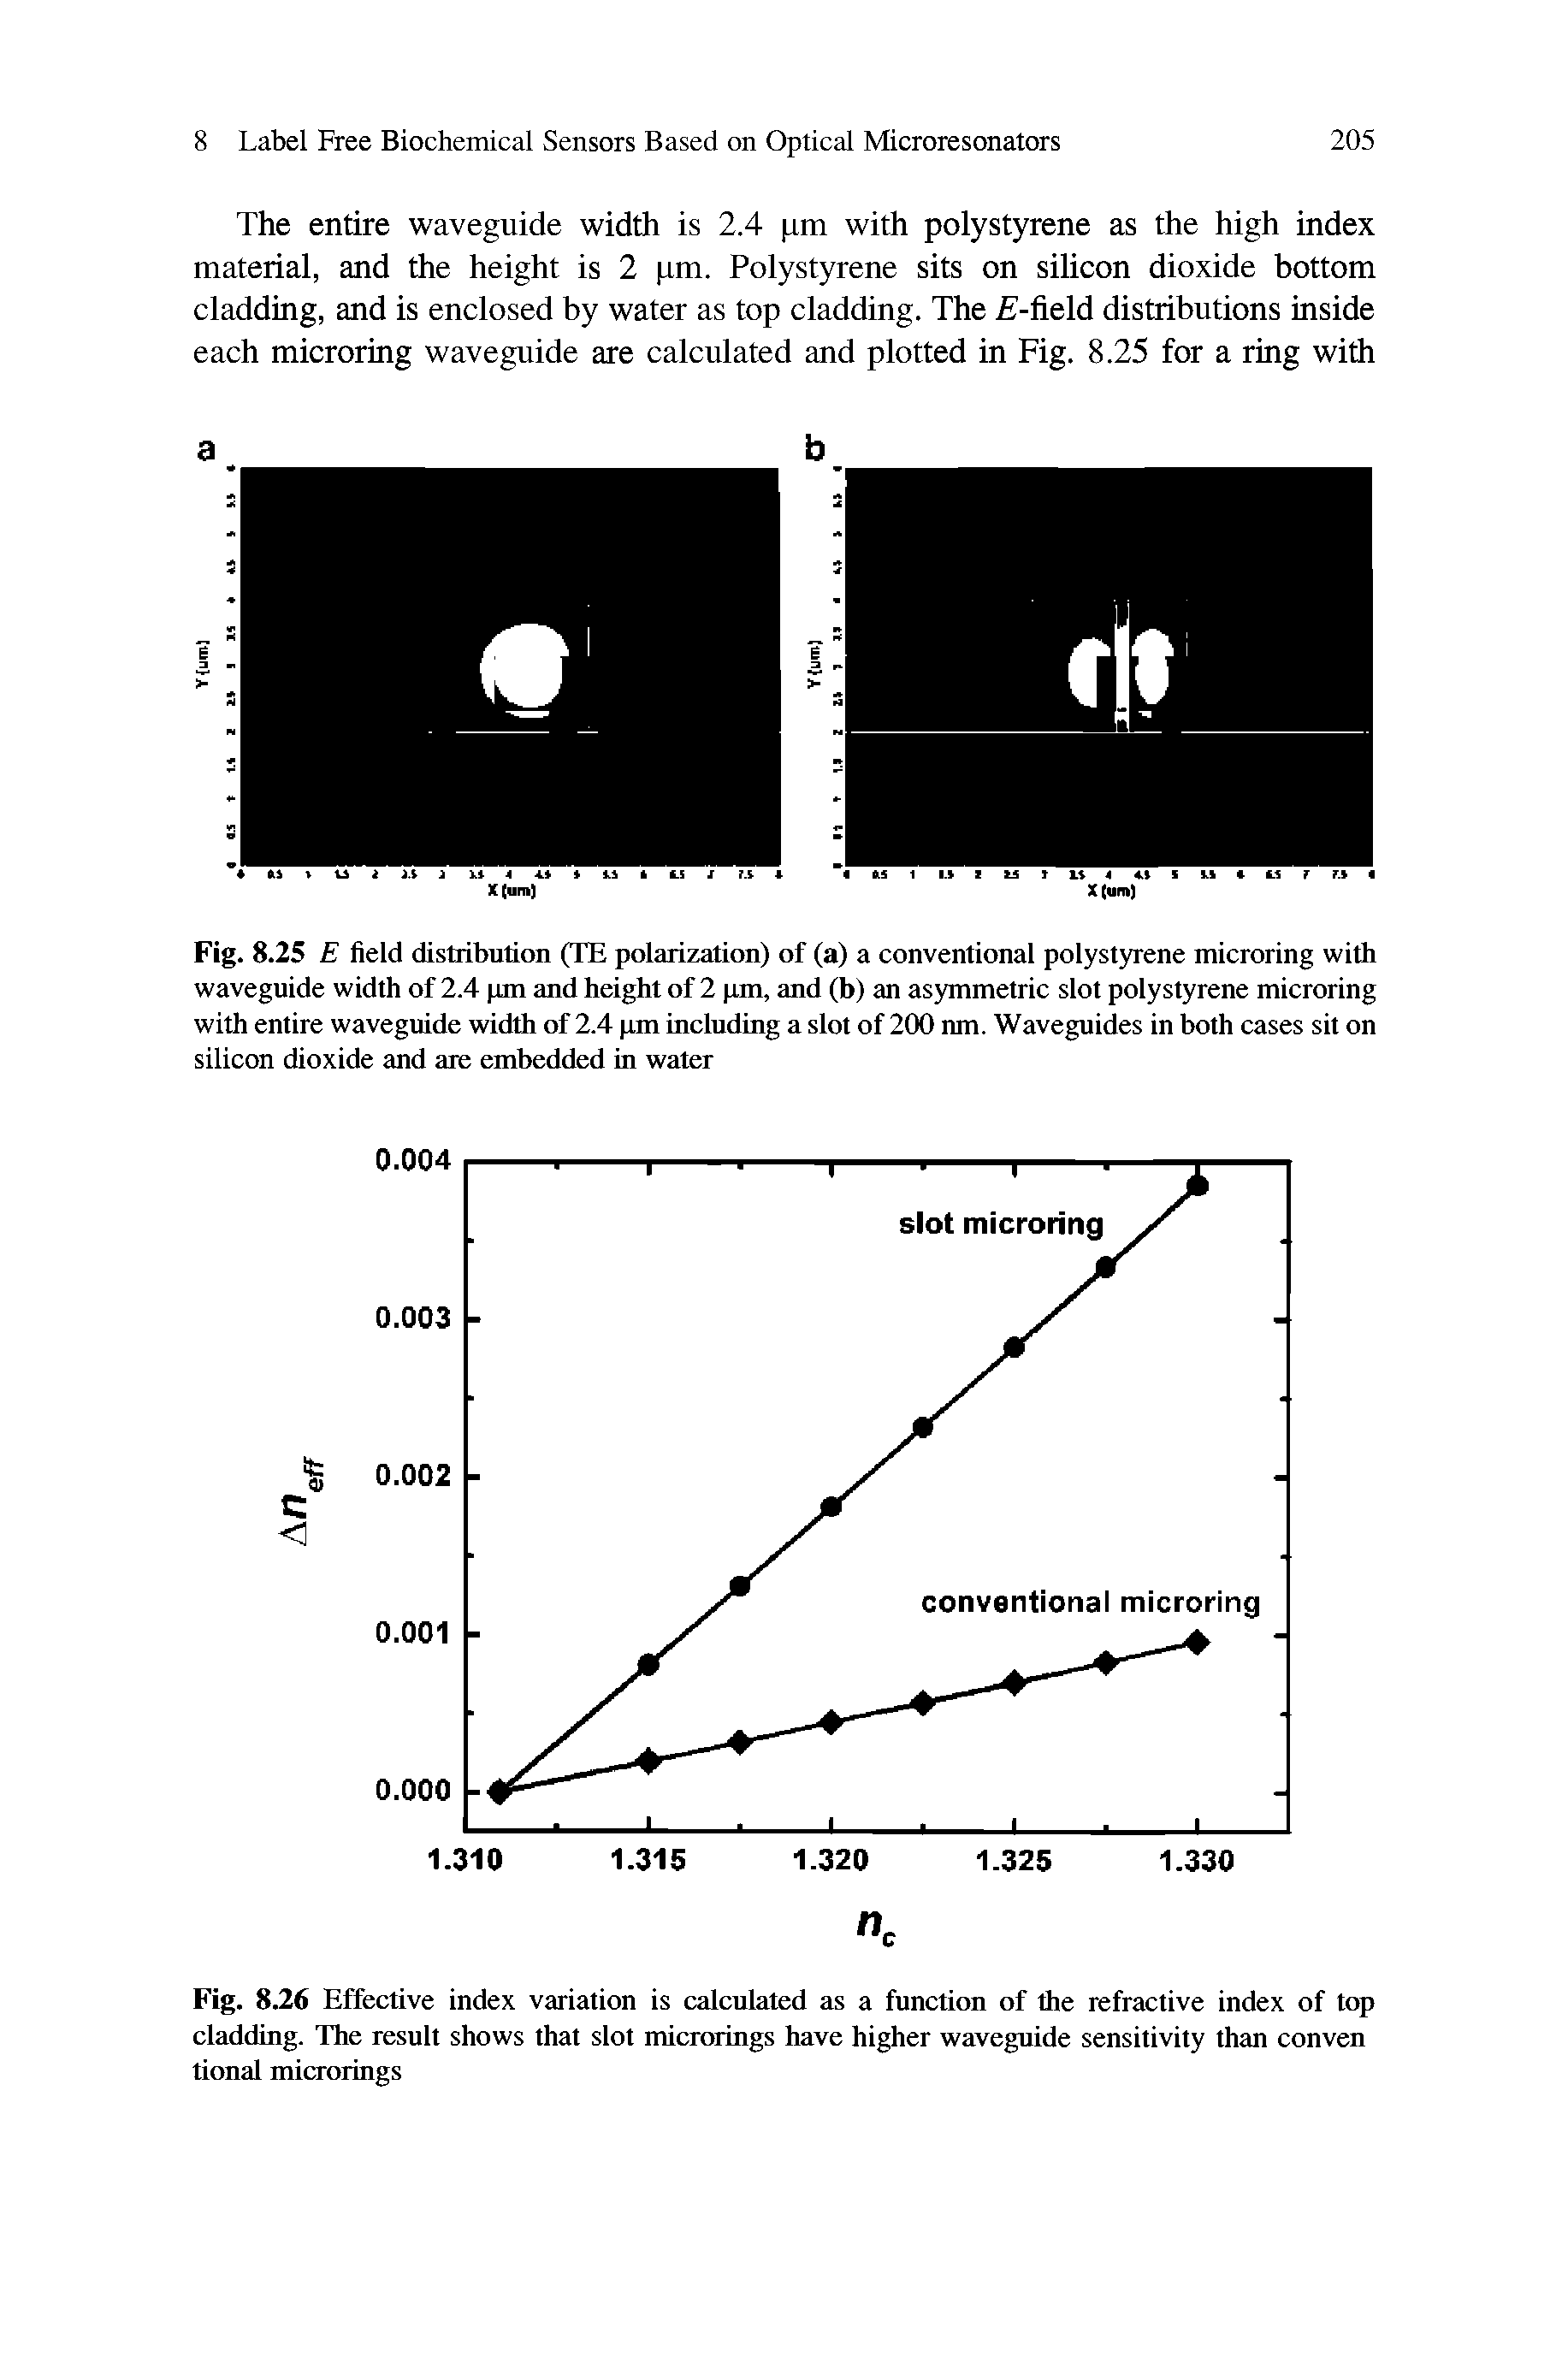 Fig. 8.25 E field distribution (TE polarization) of (a) a conventional polystyrene microring with waveguide width of 2.4 pm and height of 2 pm, and (b) an asymmetric slot polystyrene microring with entire waveguide width of 2.4 pm including a slot of 200 nm. Waveguides in both cases sit on silicon dioxide and are embedded in water...